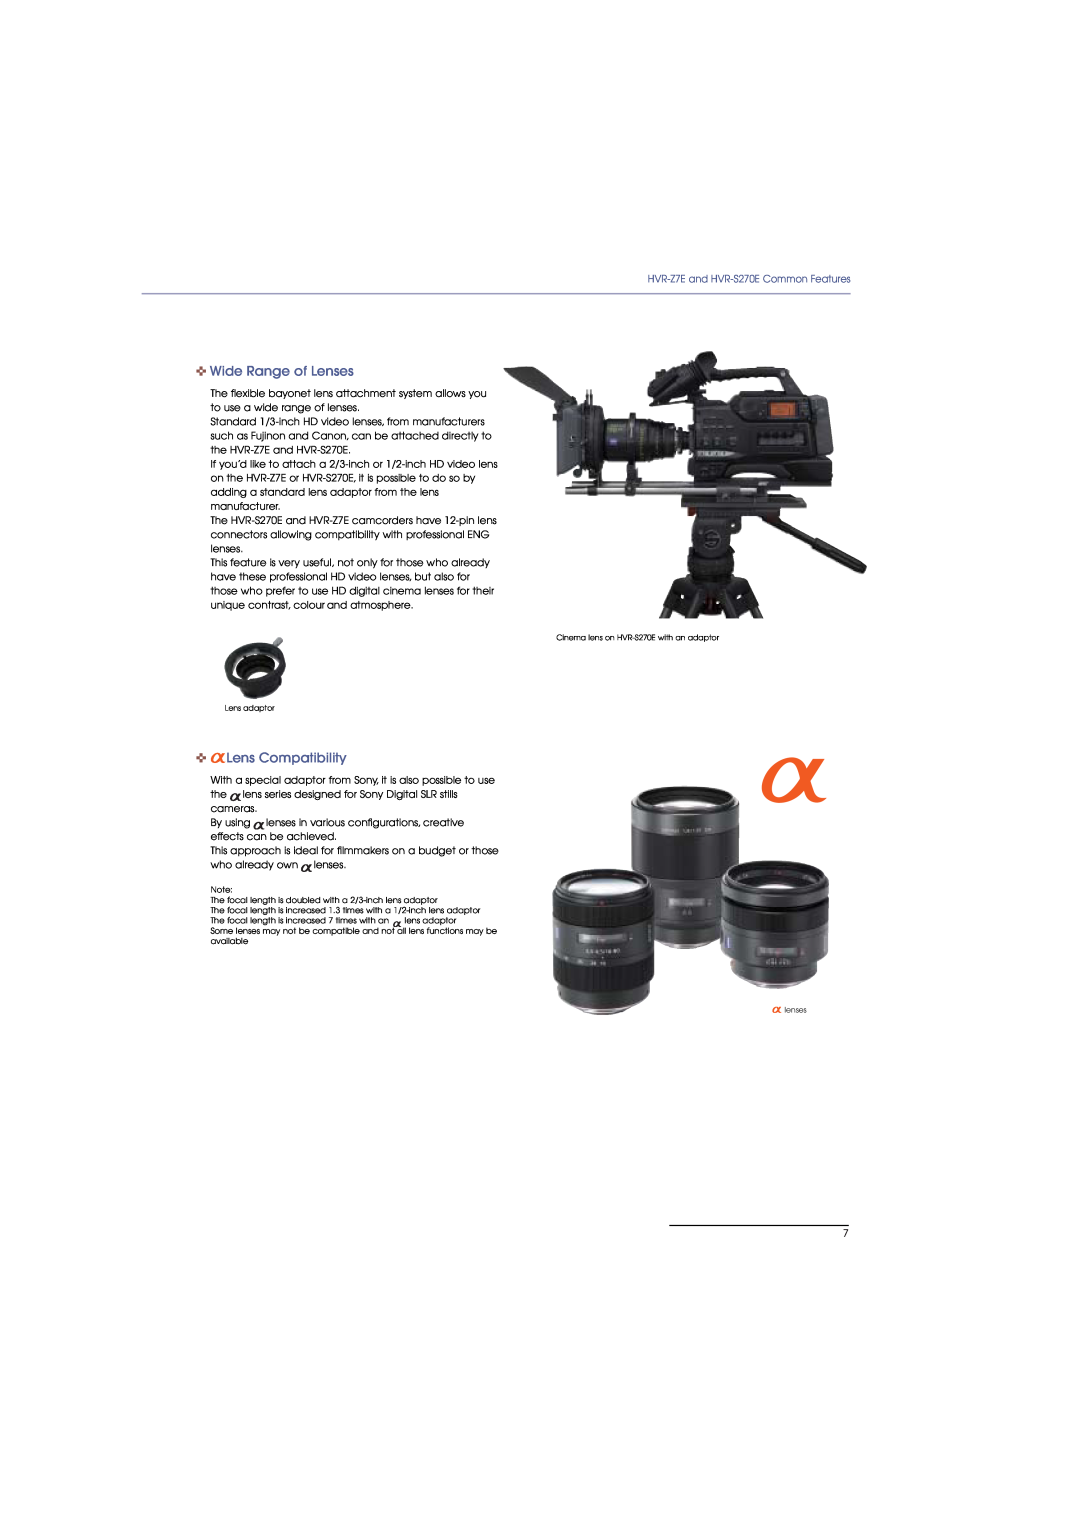 Sony HVR-M35E manual Wide Range of Lenses, Lens Compatibility, HVR-Z7E and HVR-S270E Common Features 